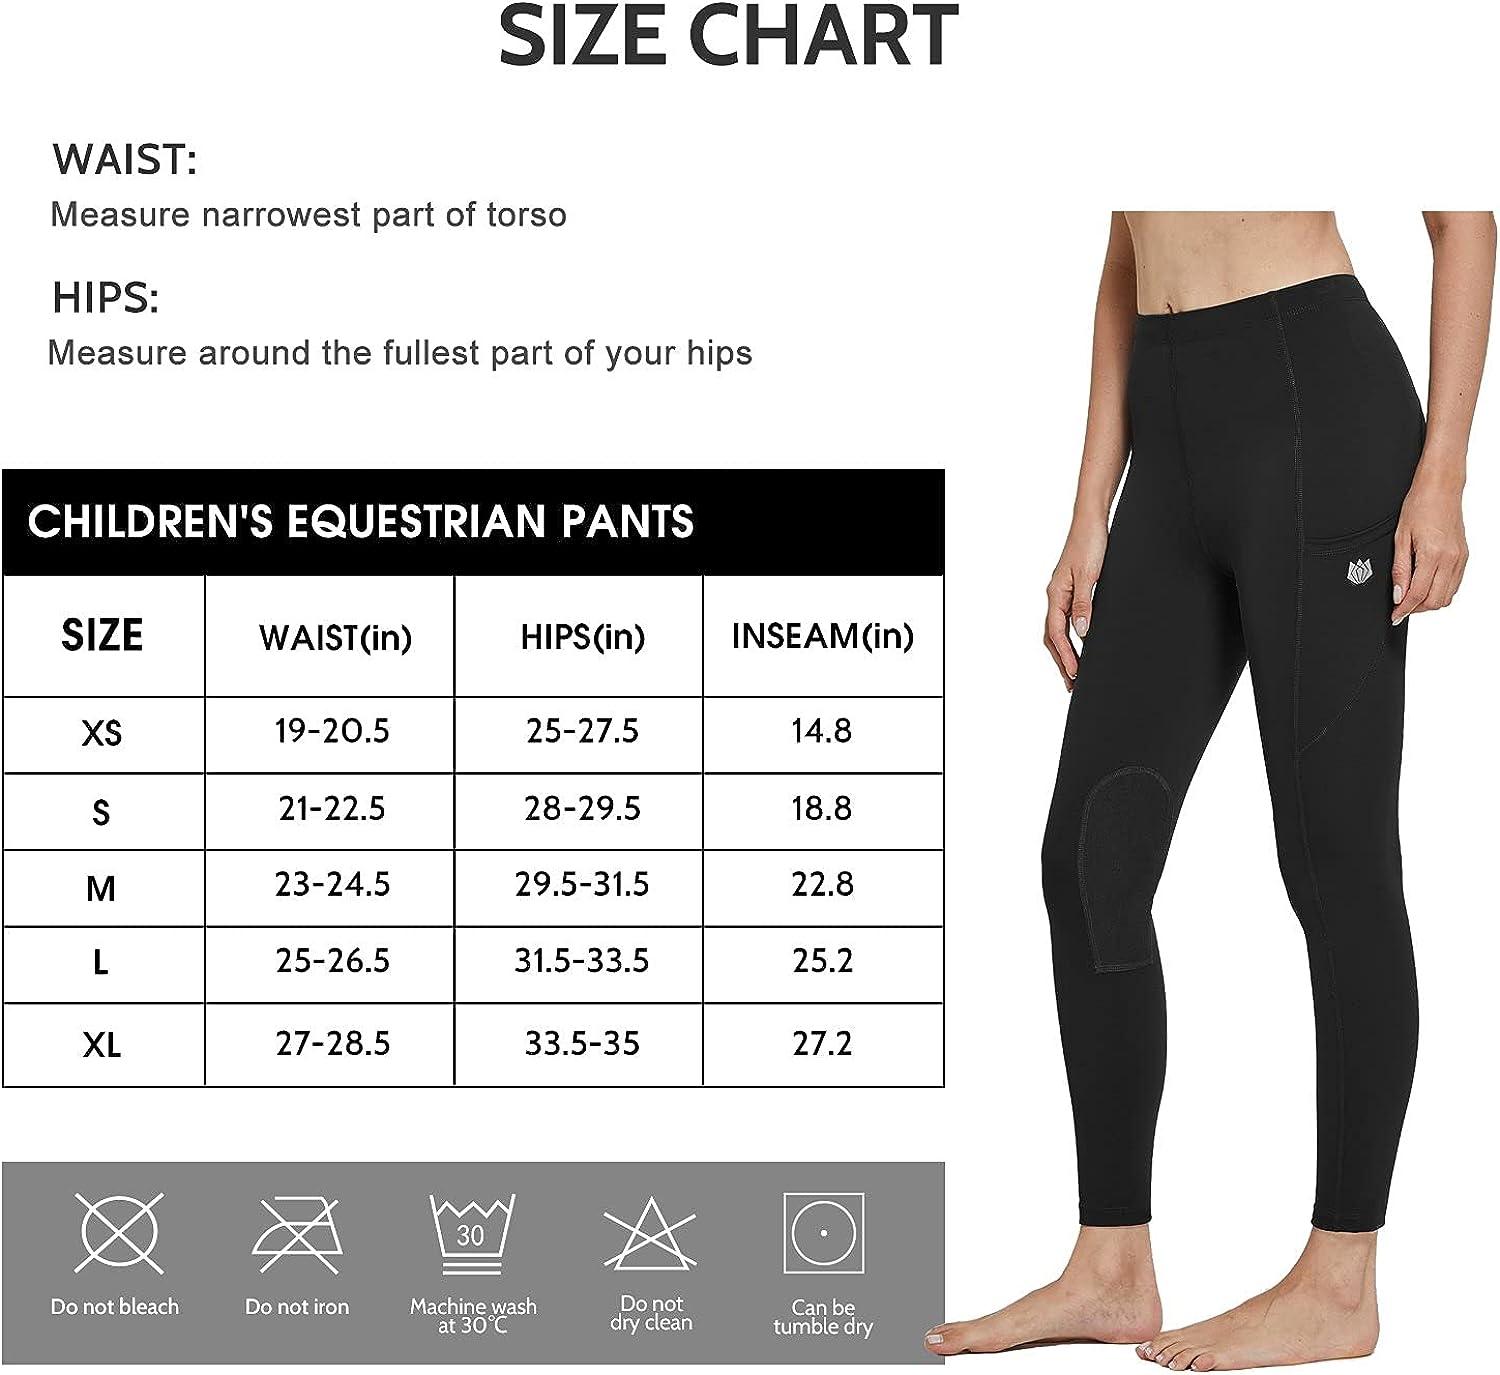  FitsT4 Sports Kid's Fleece Lined Riding Breeches Girls Winter  Equestrian Pants Knee Patch Schooling Tights Cell Pocket Black XS :  Clothing, Shoes & Jewelry